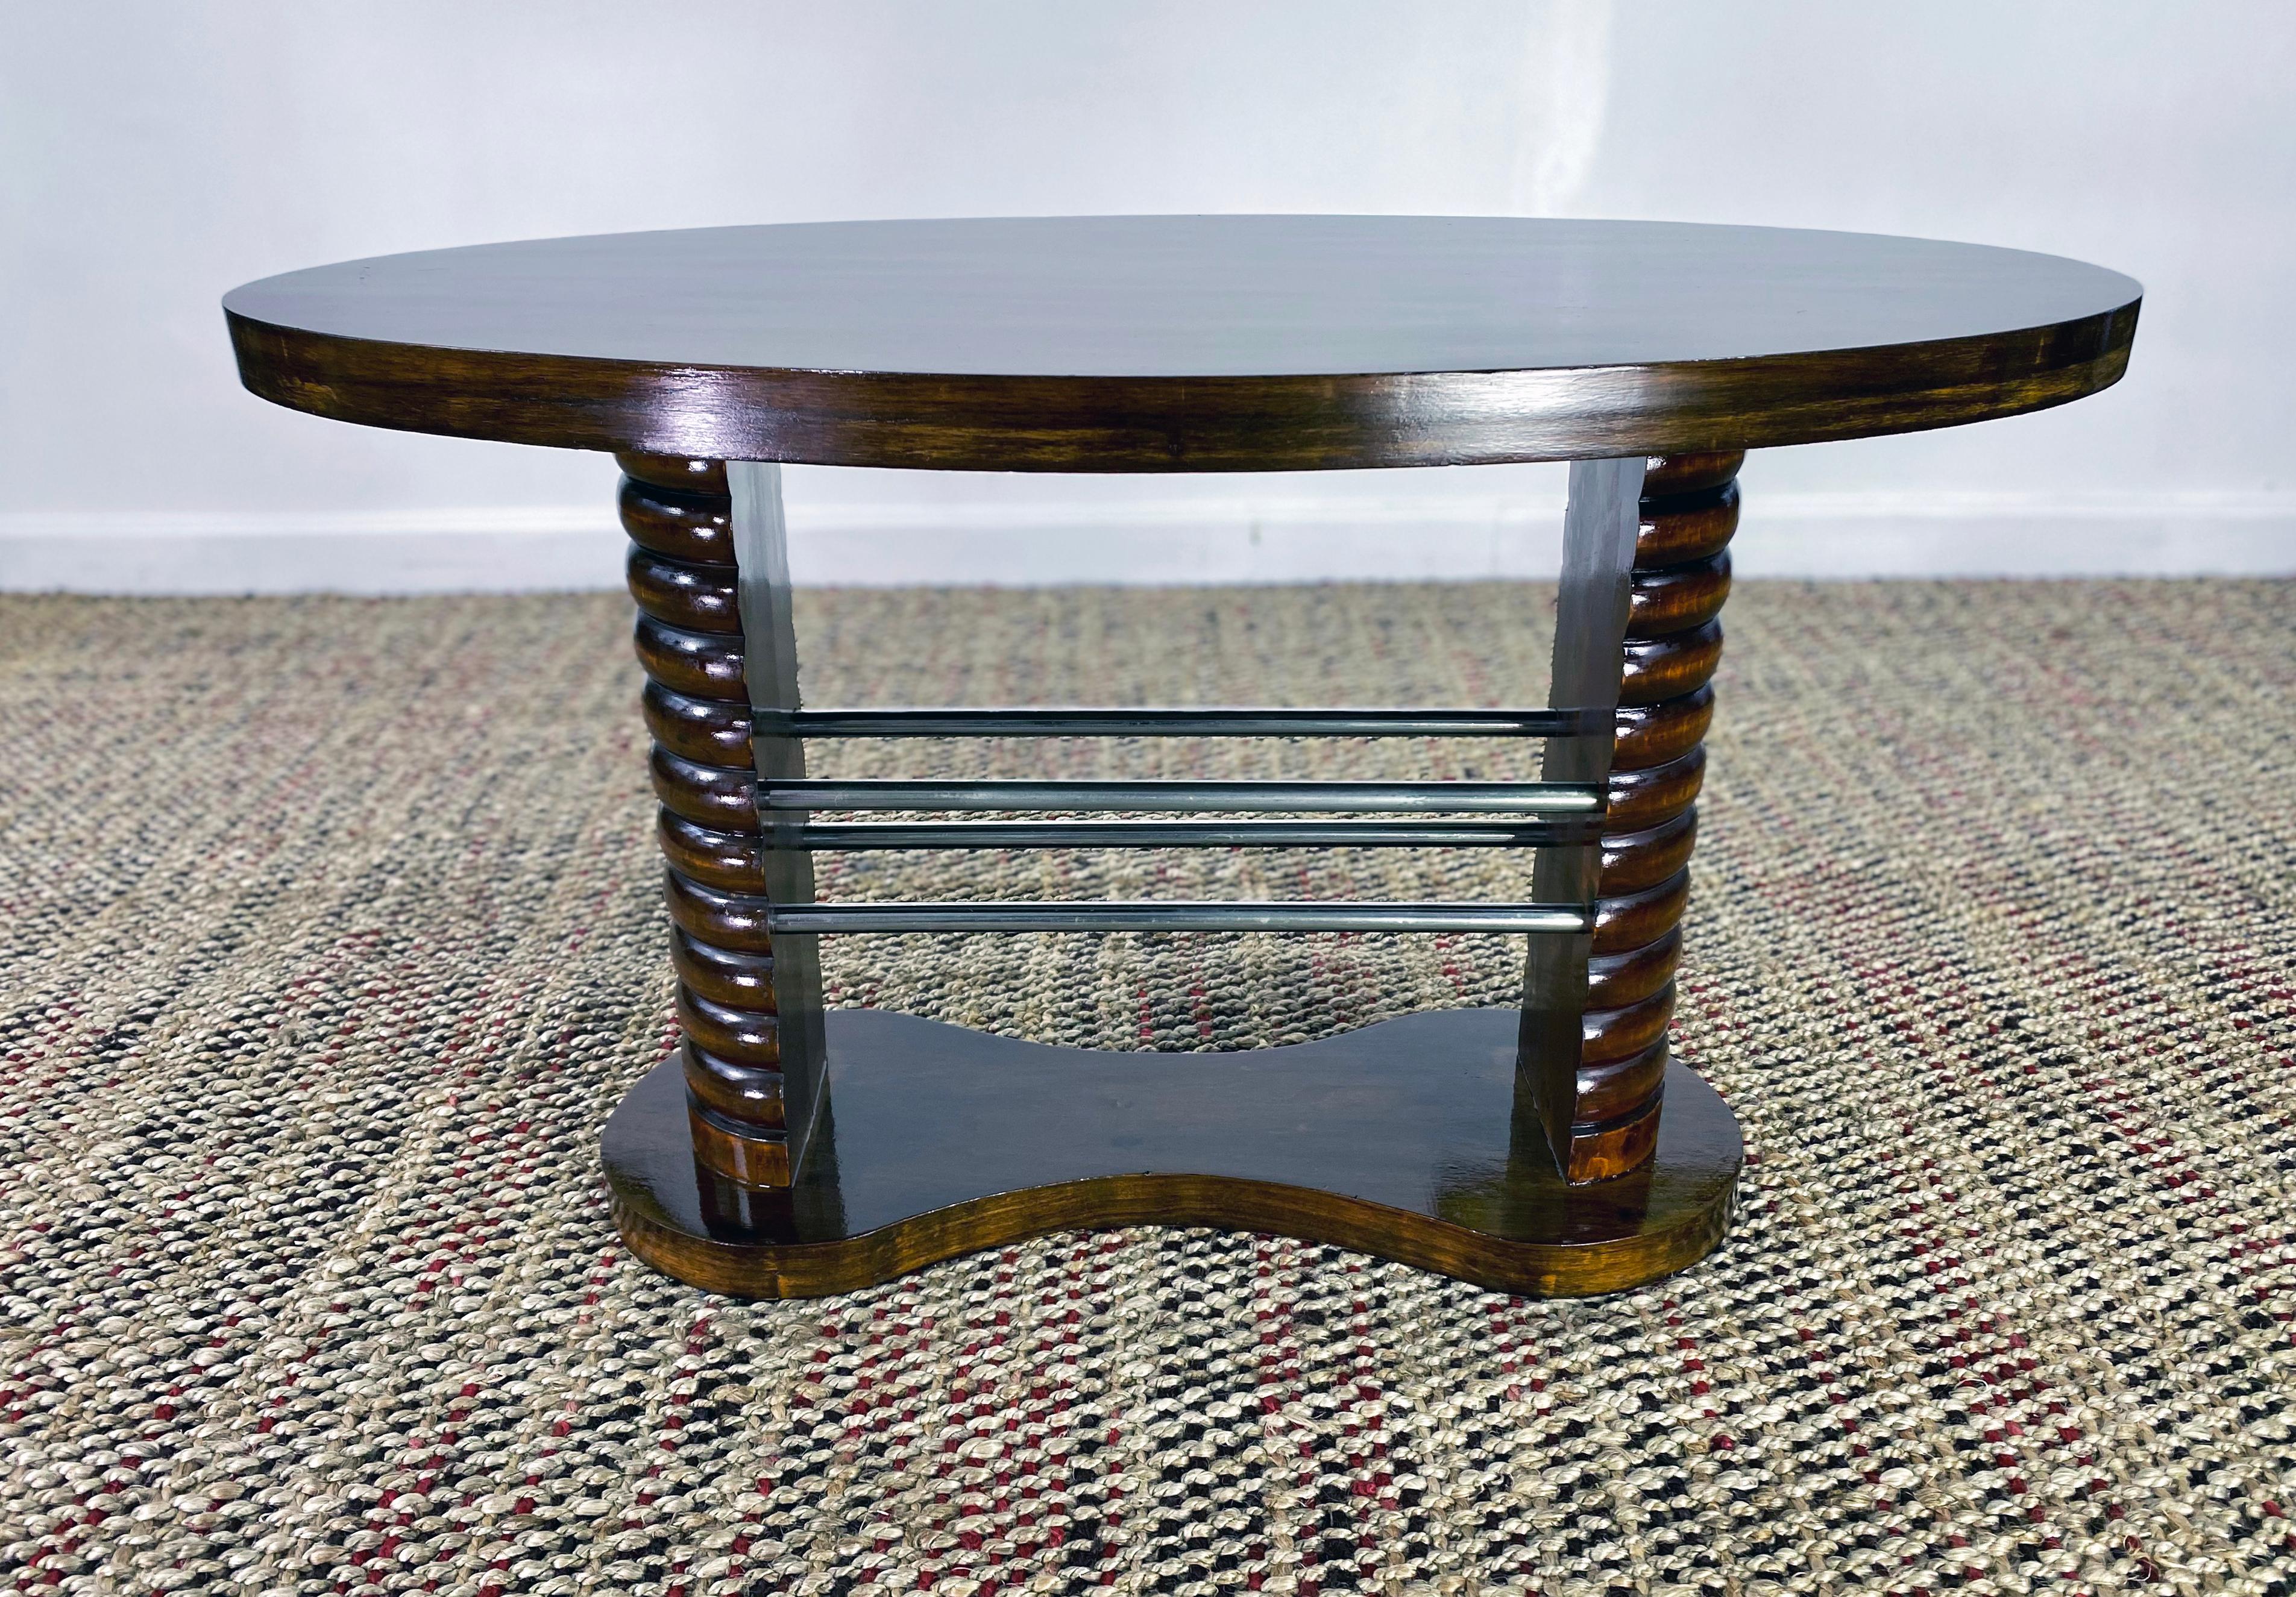 1930s Art Deco French coffee table. This mahogany top guéridon is mounted on two demilune solid wood carved columns joined by 4 chrome bars. The side table is fully restored. In perfect condition. France, circa 1930.
Measurement:
Oval top 39